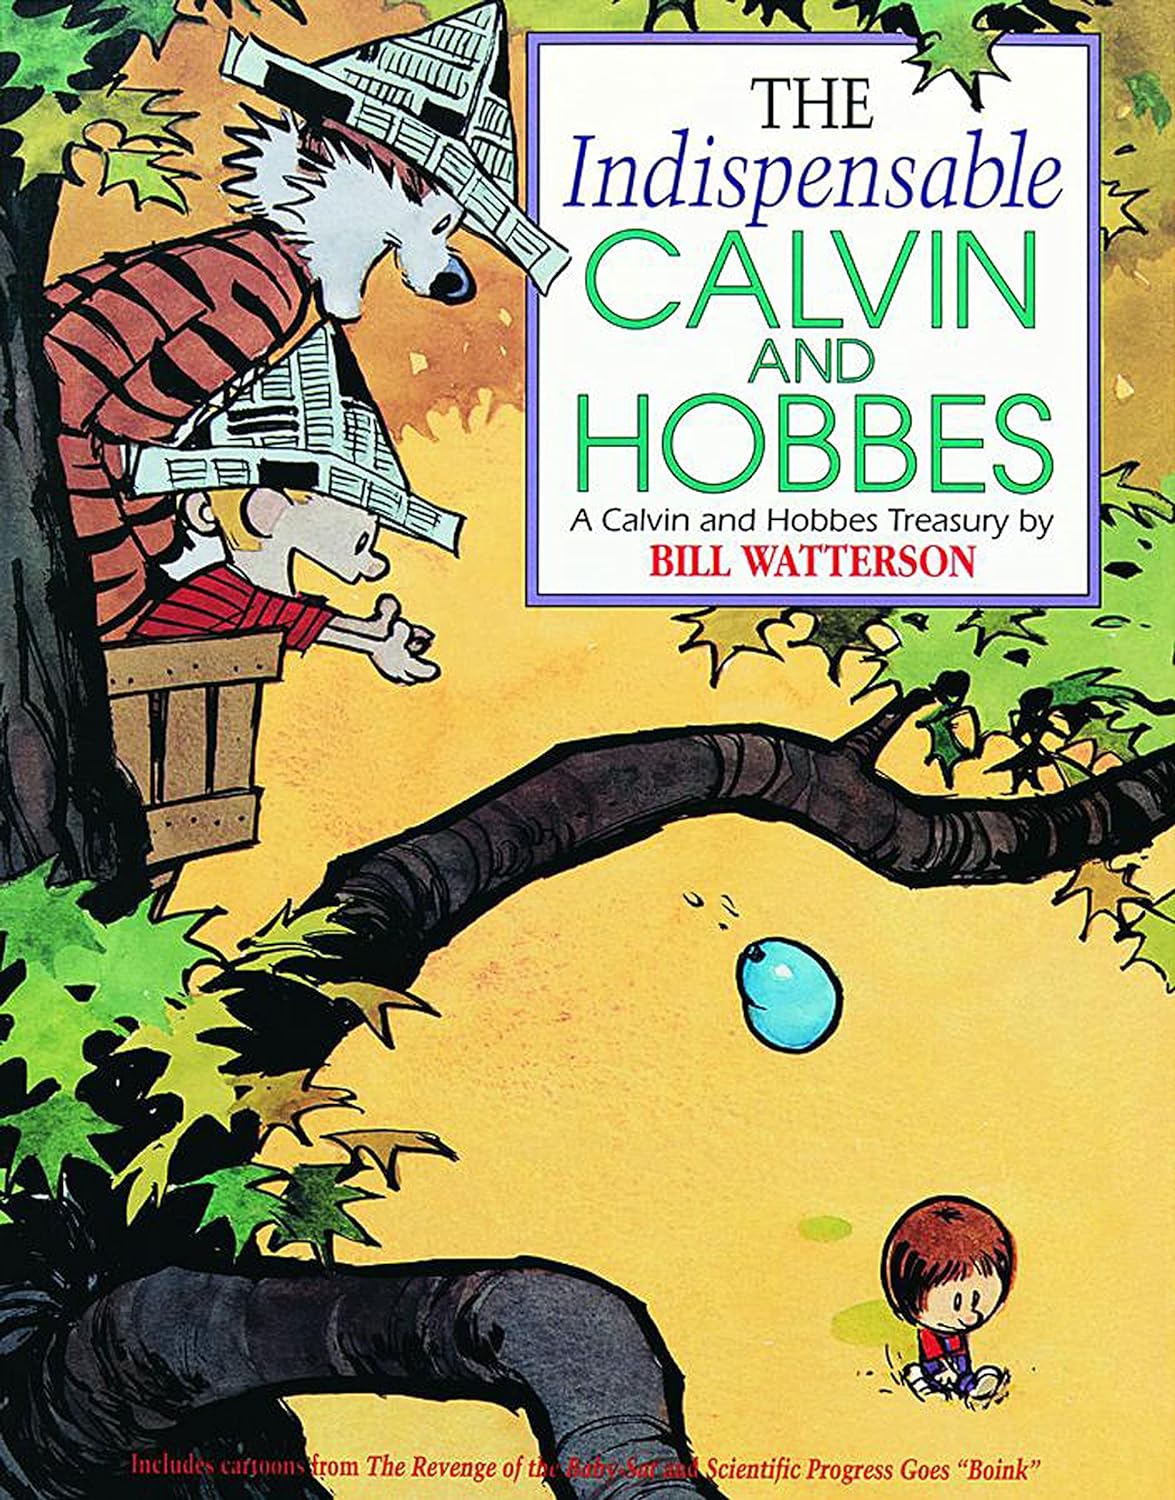 Bill Watterson: The indispensable Calvin and Hobbes (1992, Andrews and McMeel)